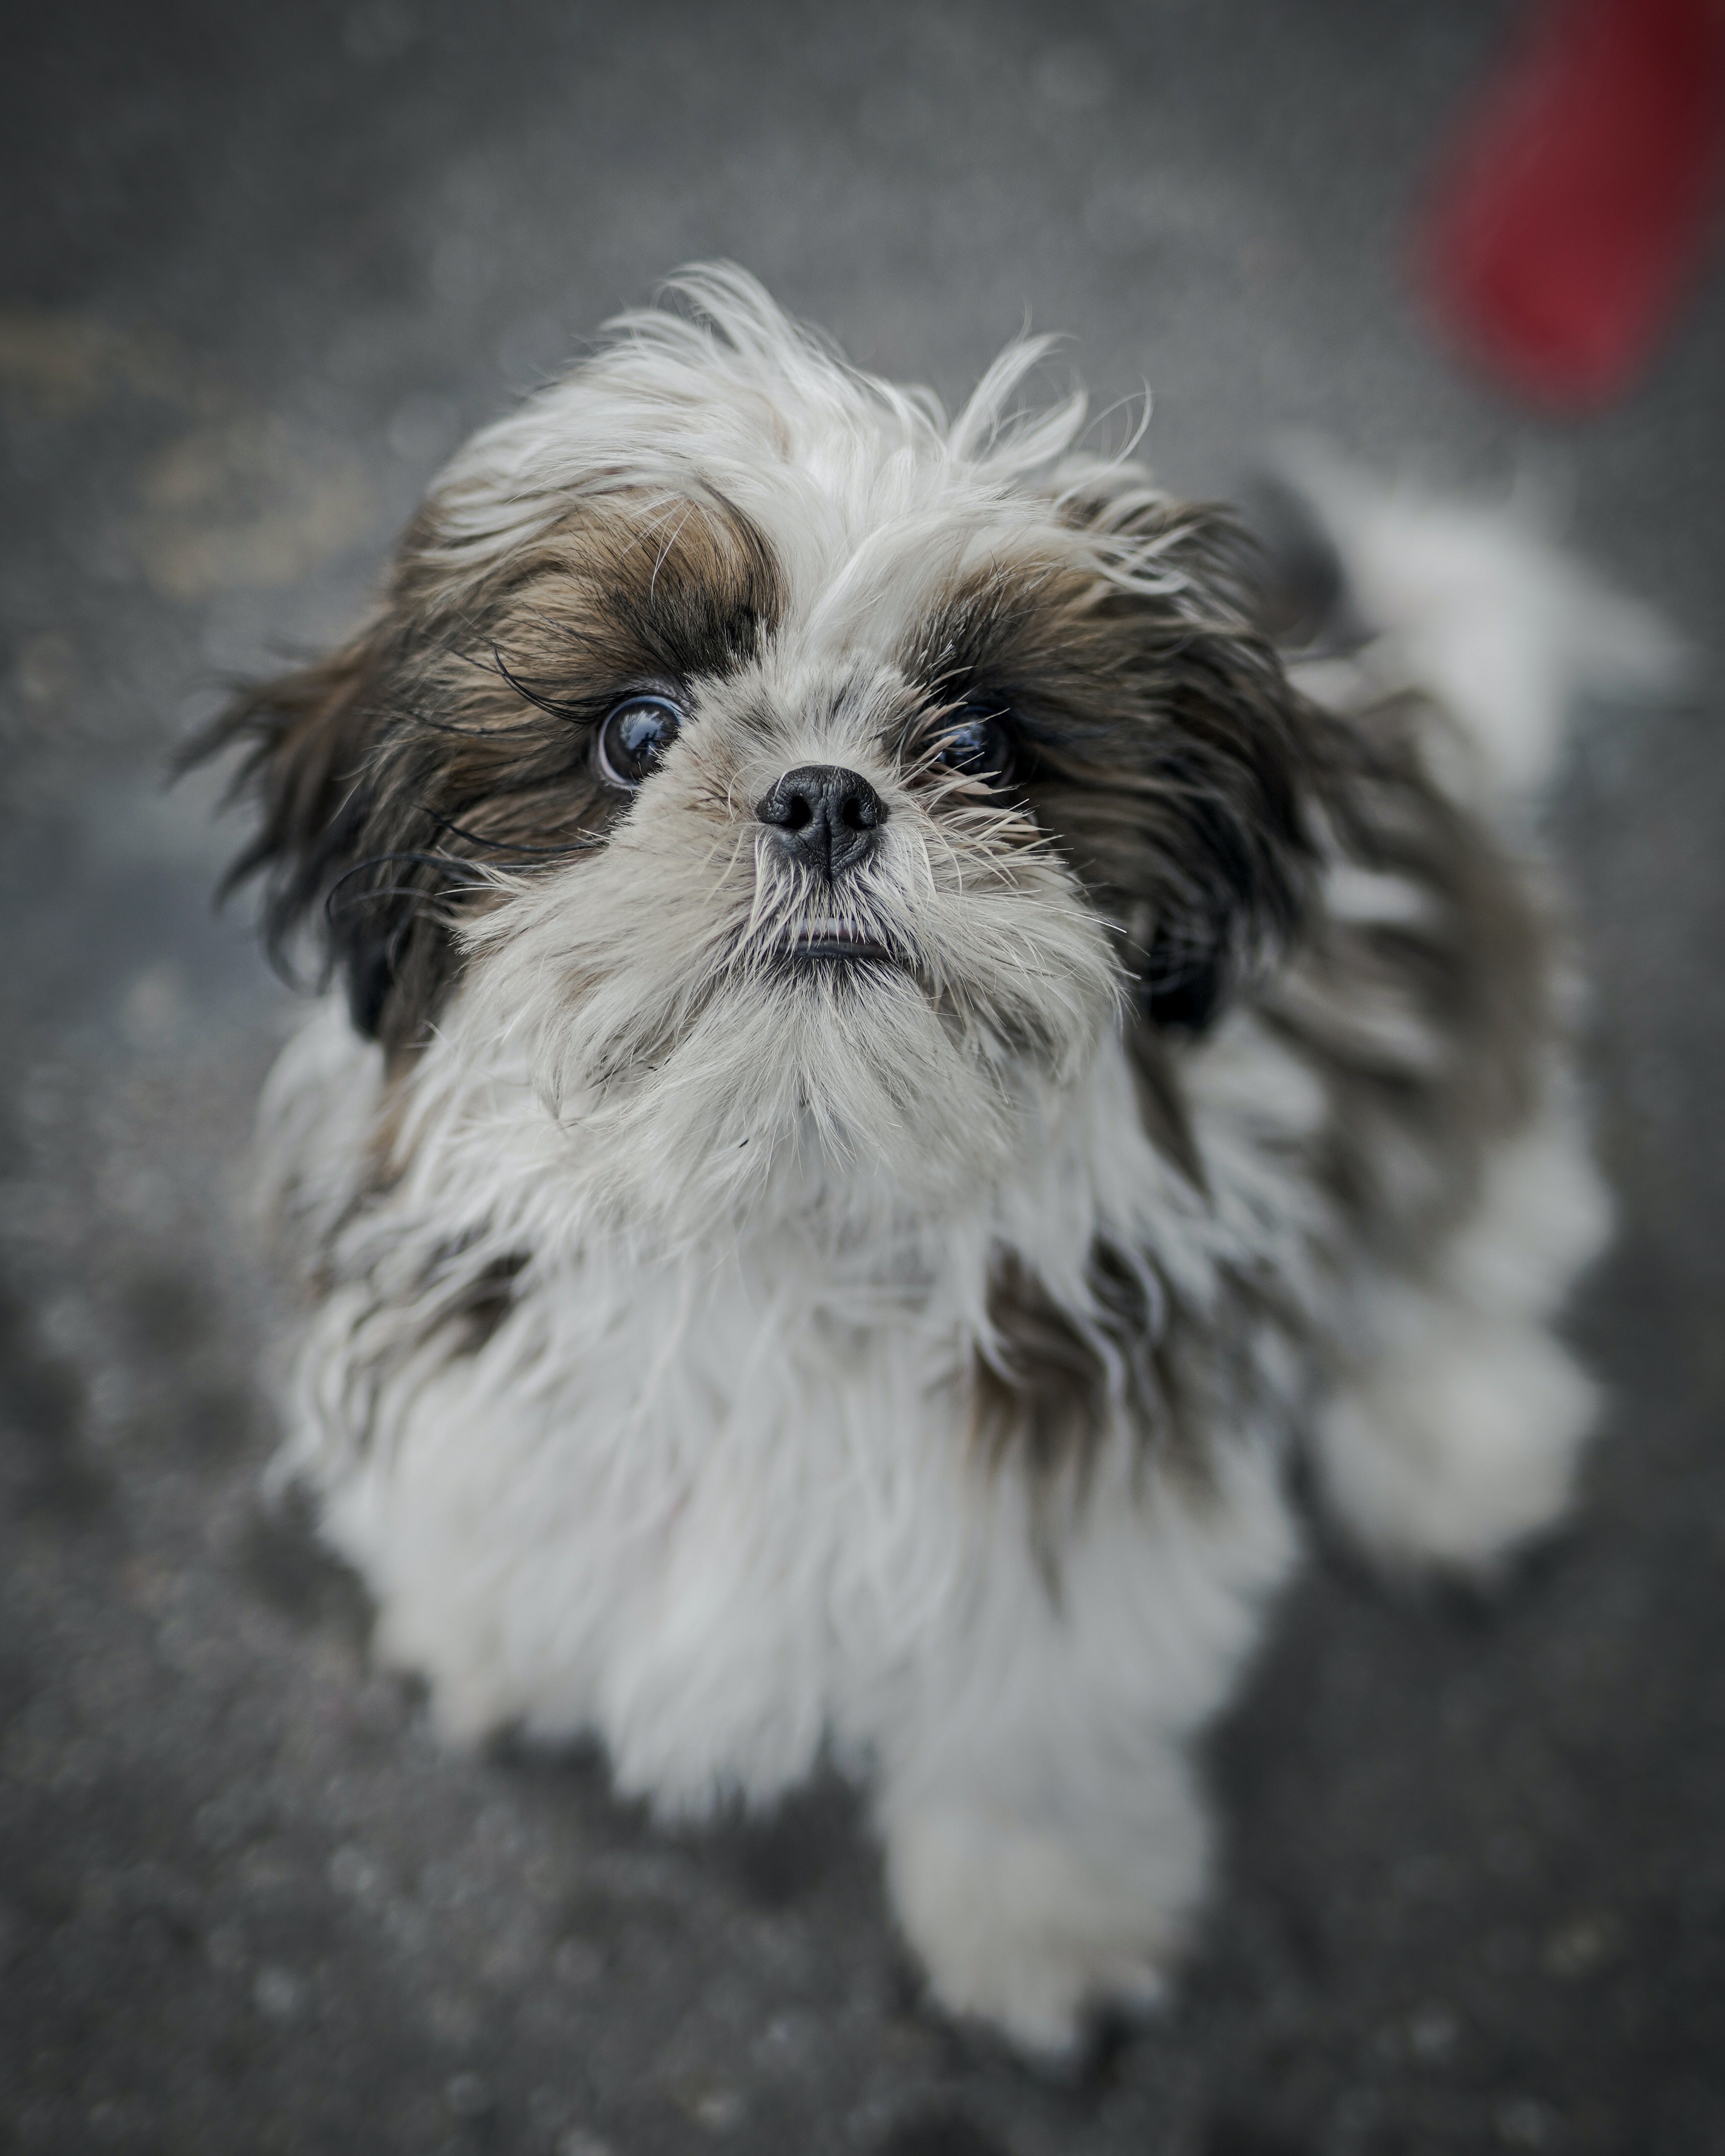 White and brown shih tzu in black and white striped shirt